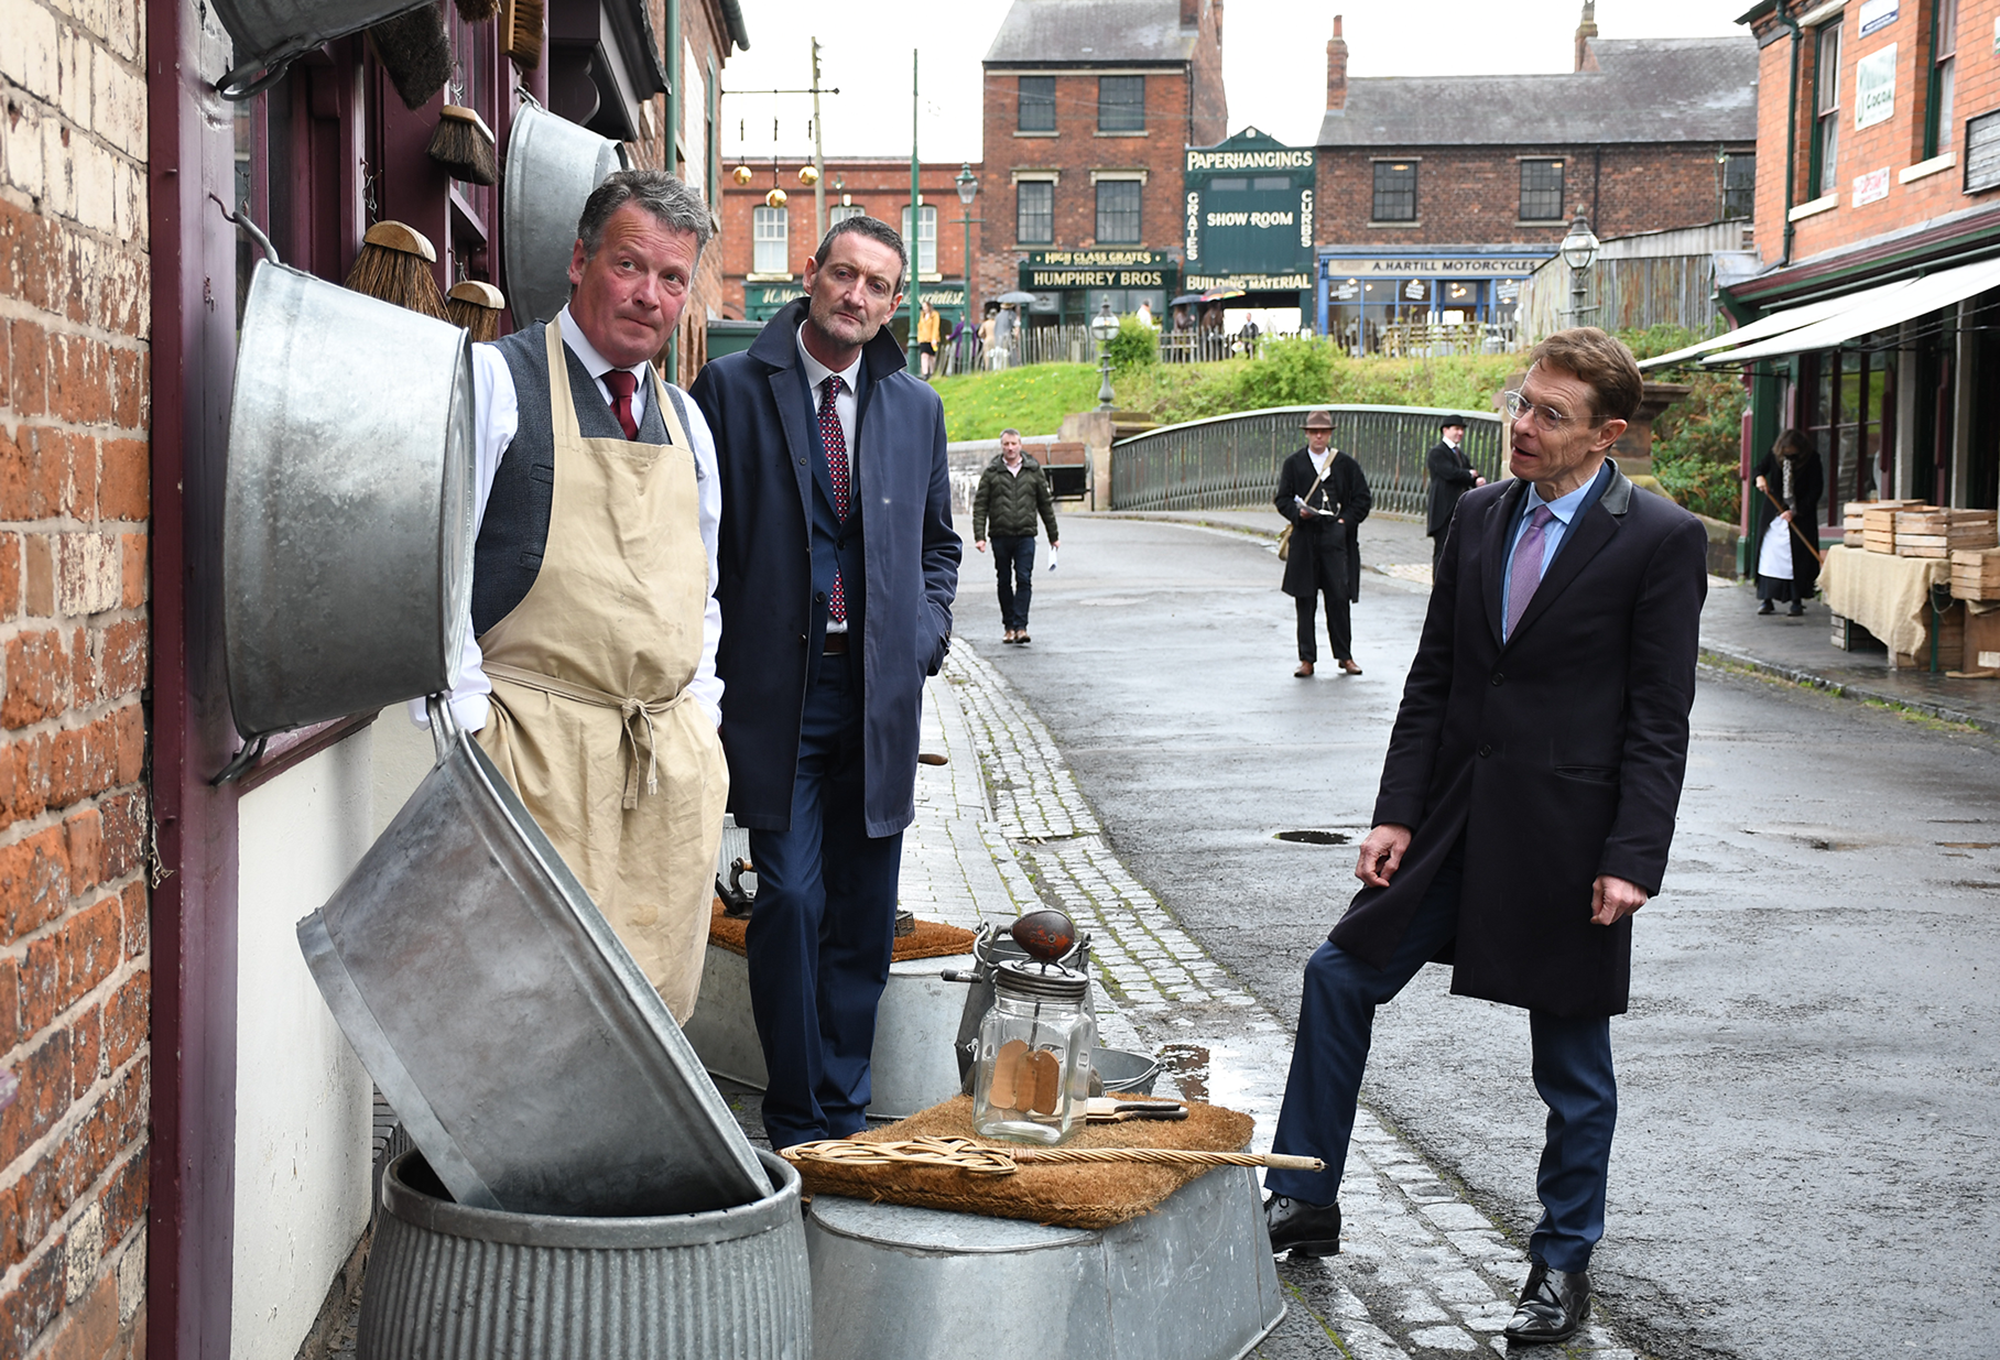 Andy Street, Mayor of the West Midlands (right) and Andrew Lovett (centre) chief executive officer at Black Country Living Museum meet one of the museum's historic characters